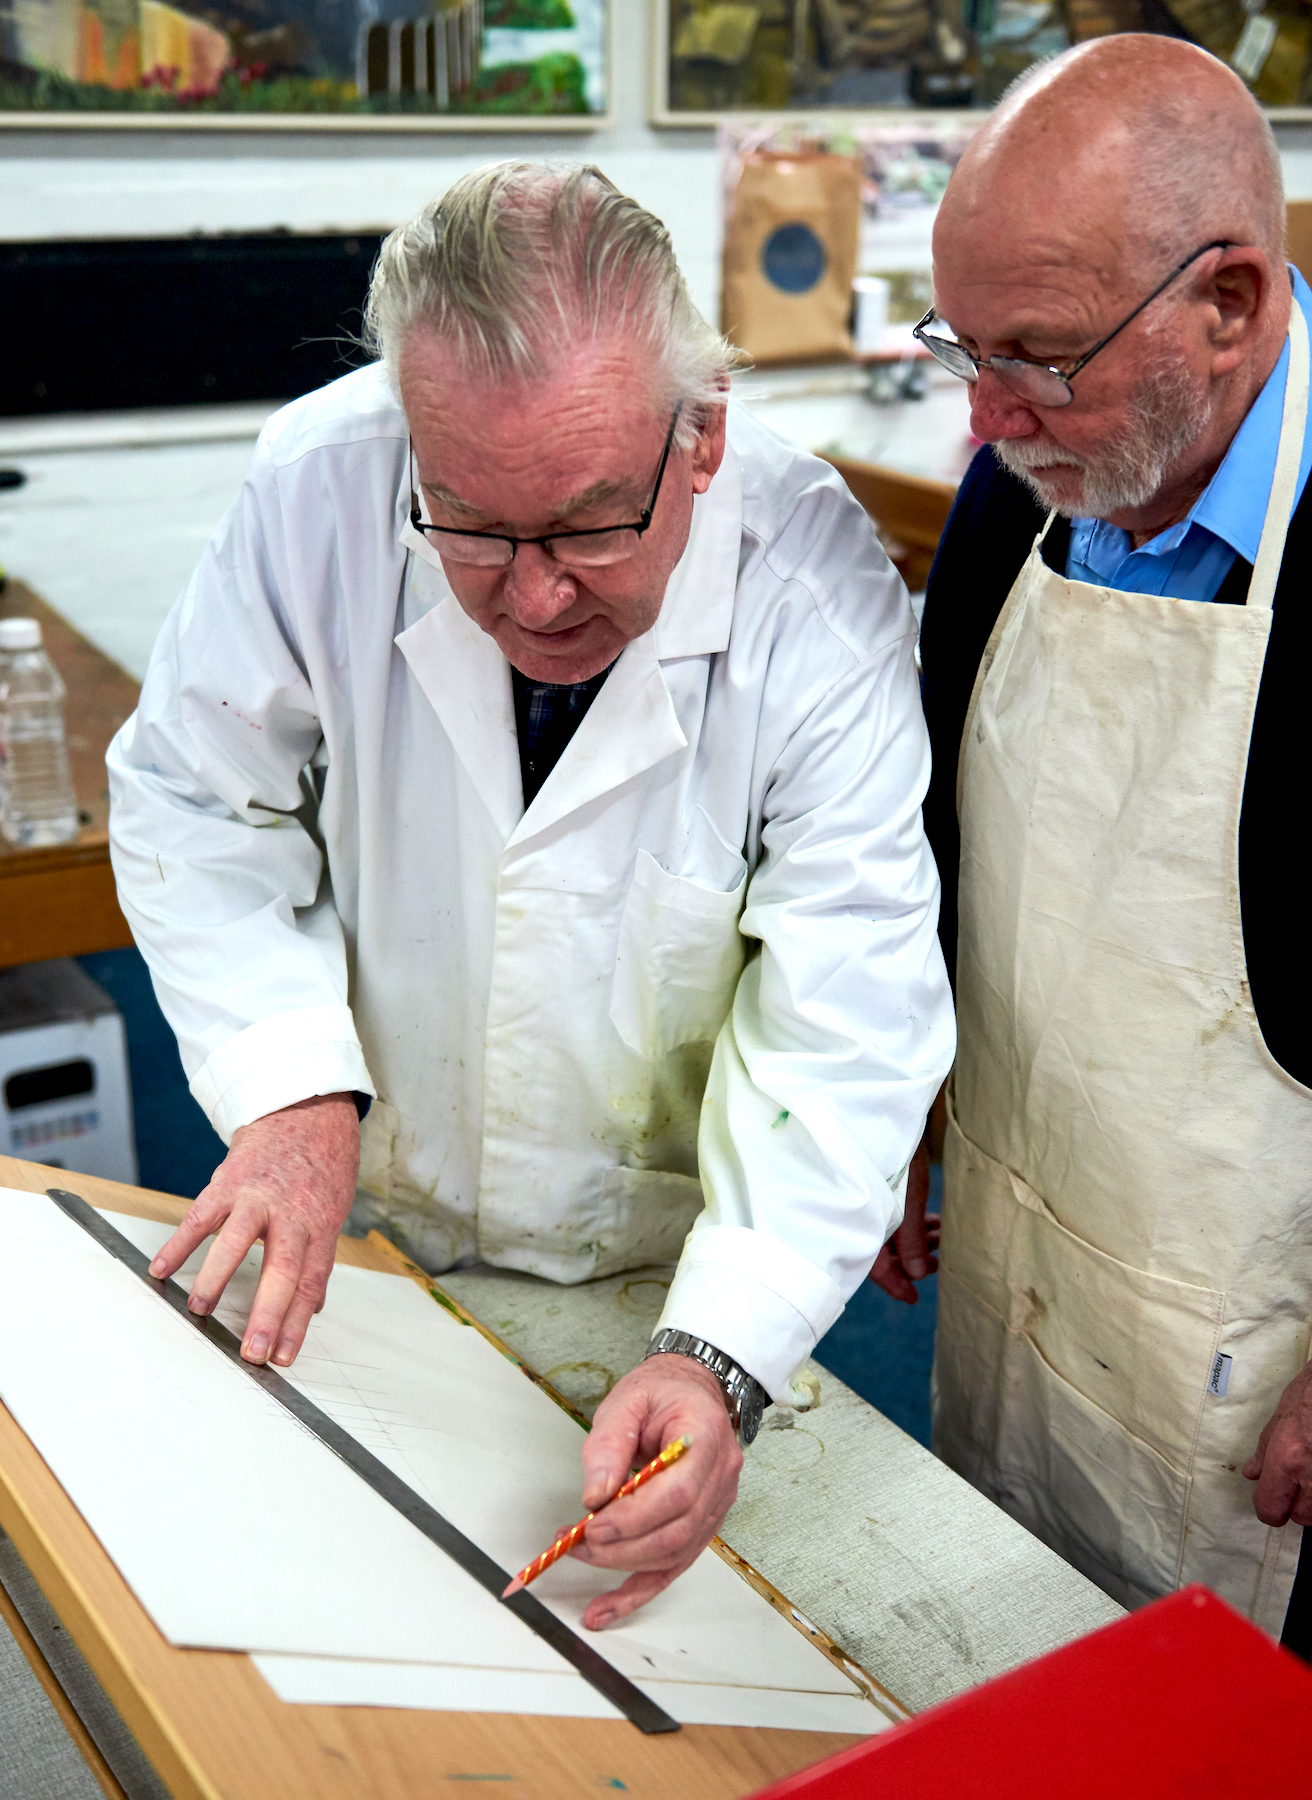 Ric & Roy in the Art Studio (Taken before Covid restrictions)